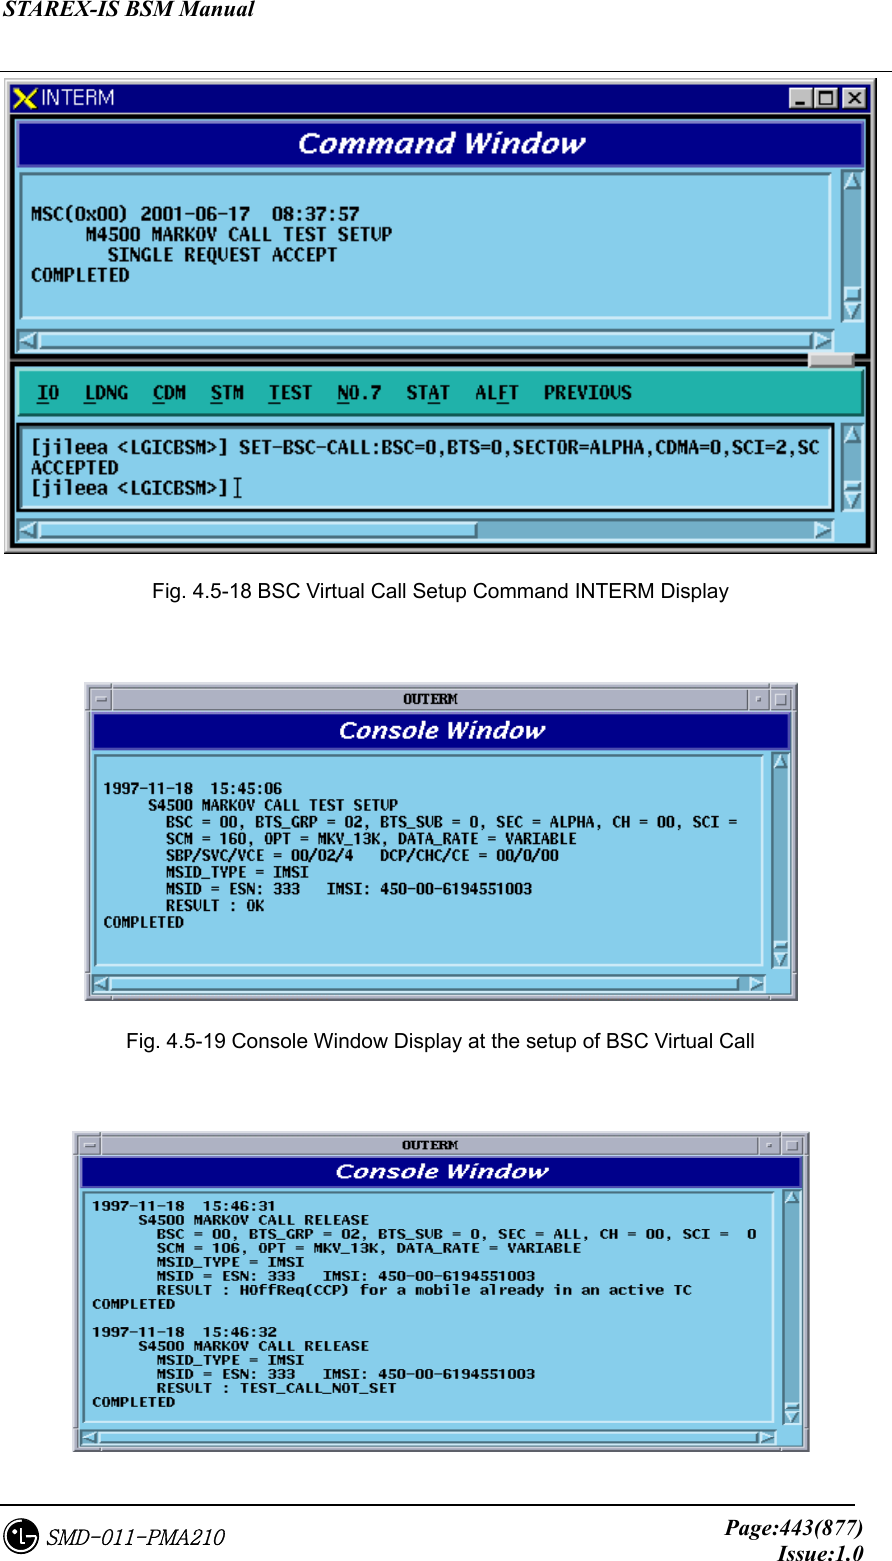 STAREX-IS BSM Manual     Page:443(877)Issue:1.0SMD-011-PMA210  Fig. 4.5-18 BSC Virtual Call Setup Command INTERM Display   Fig. 4.5-19 Console Window Display at the setup of BSC Virtual Call     